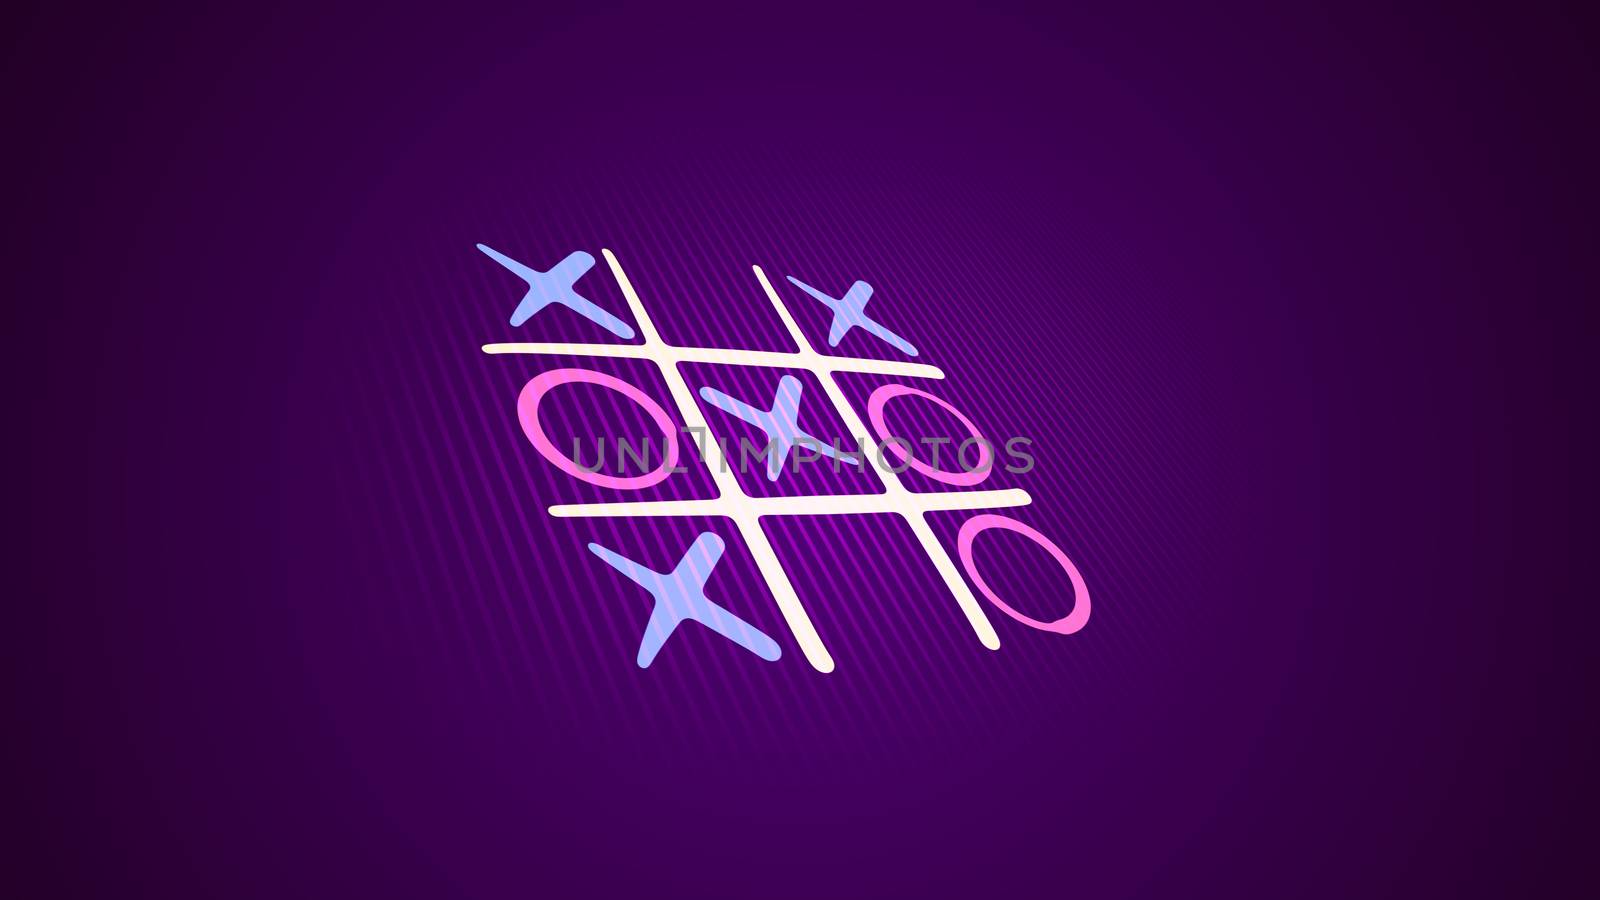 Hilarious 3d illustration of a noughts and crosses game with a white grid, pink and blue marks and an original end with a long line in the black background. It looks optimistic and fine.